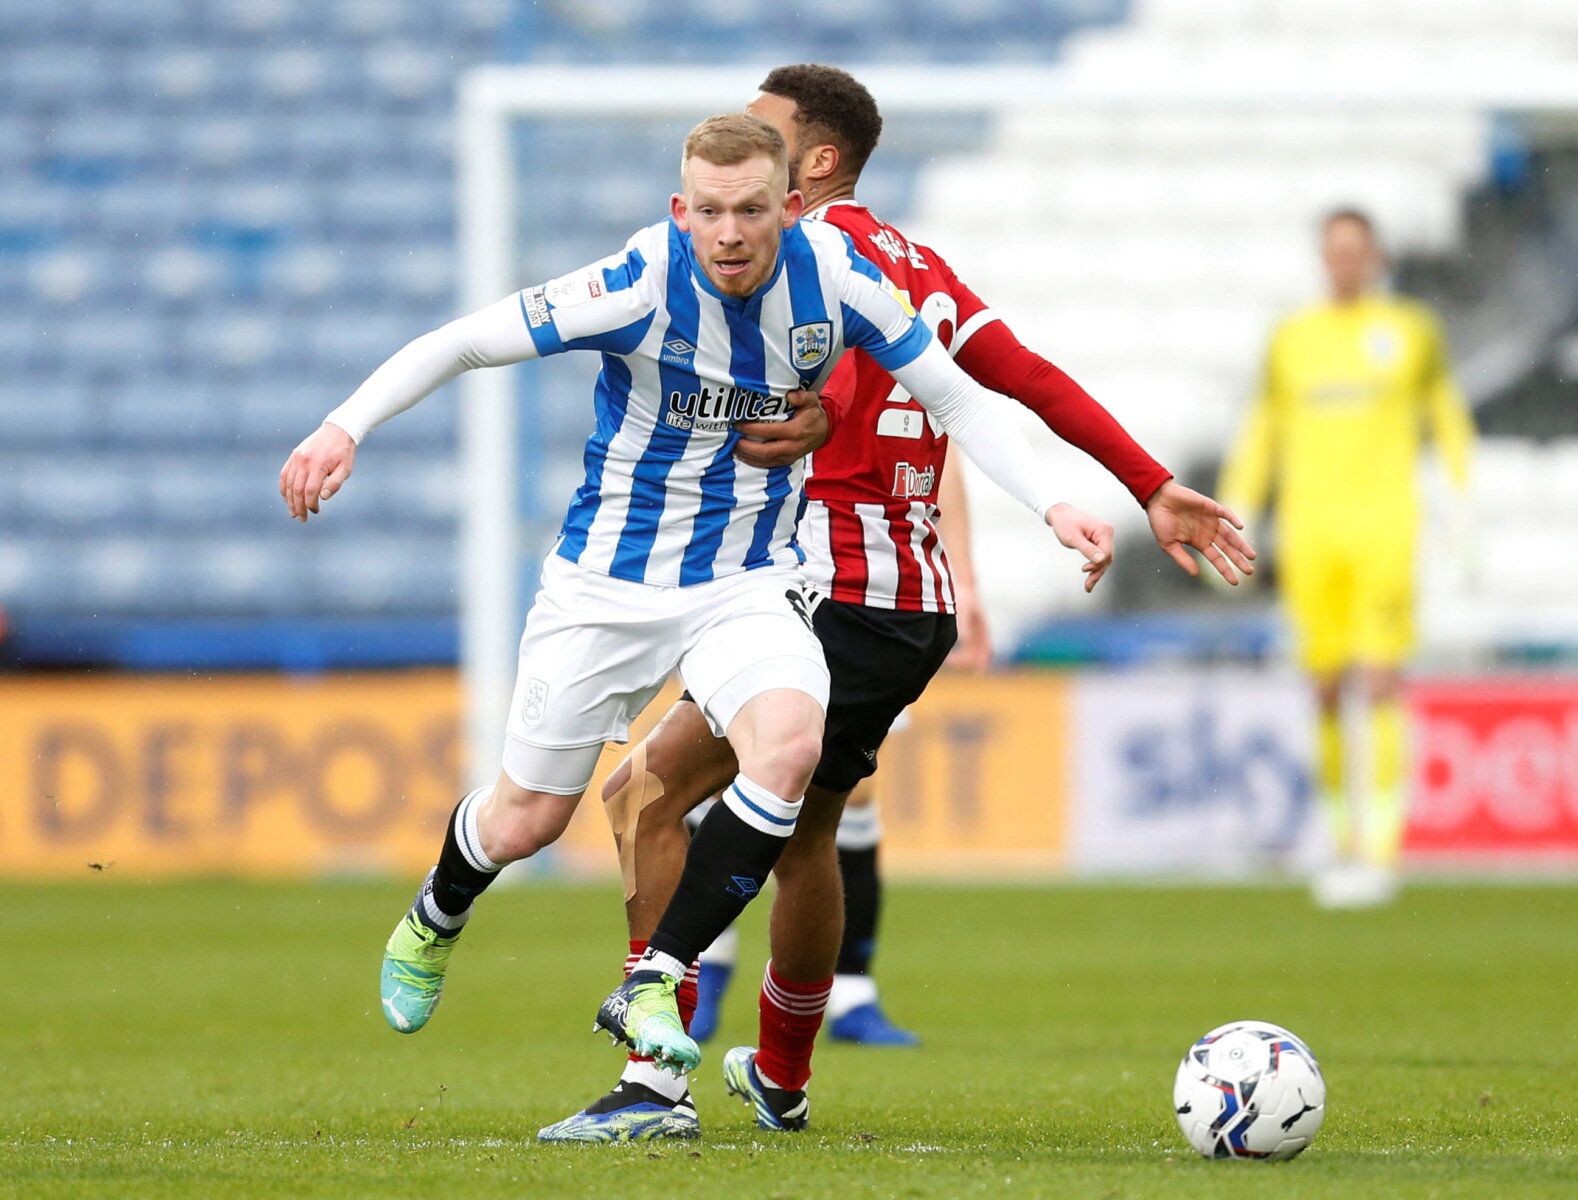 Soccer Football - Championship - Huddersfield Town v Sheffield United - John Smith's Stadium, Huddersfield, Britain - February 12, 2022 Huddersfield Town's Lewis O'Brien in action  Action Images/Ed Sykes  EDITORIAL USE ONLY. No use with unauthorized audio, video, data, fixture lists, club/league logos or 